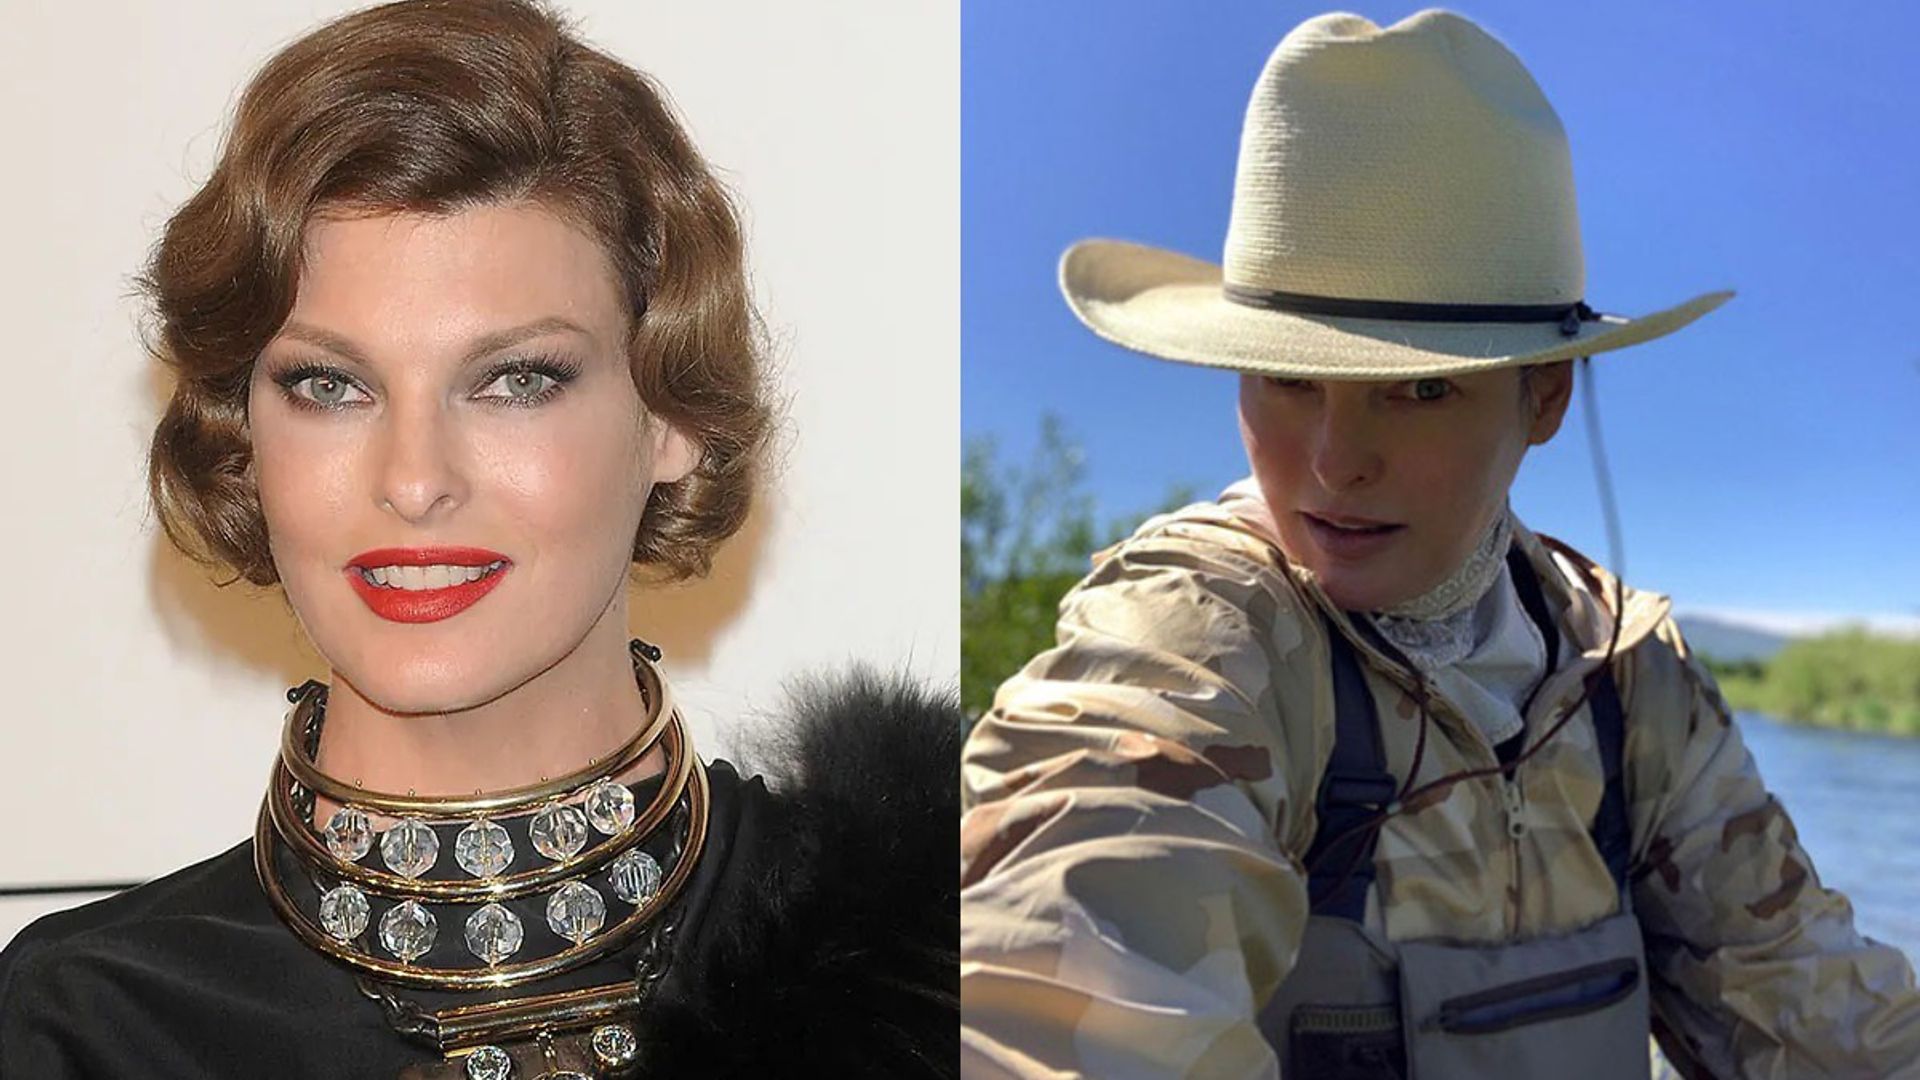 Linda Evangelista shares first photos of body after being 'brutally